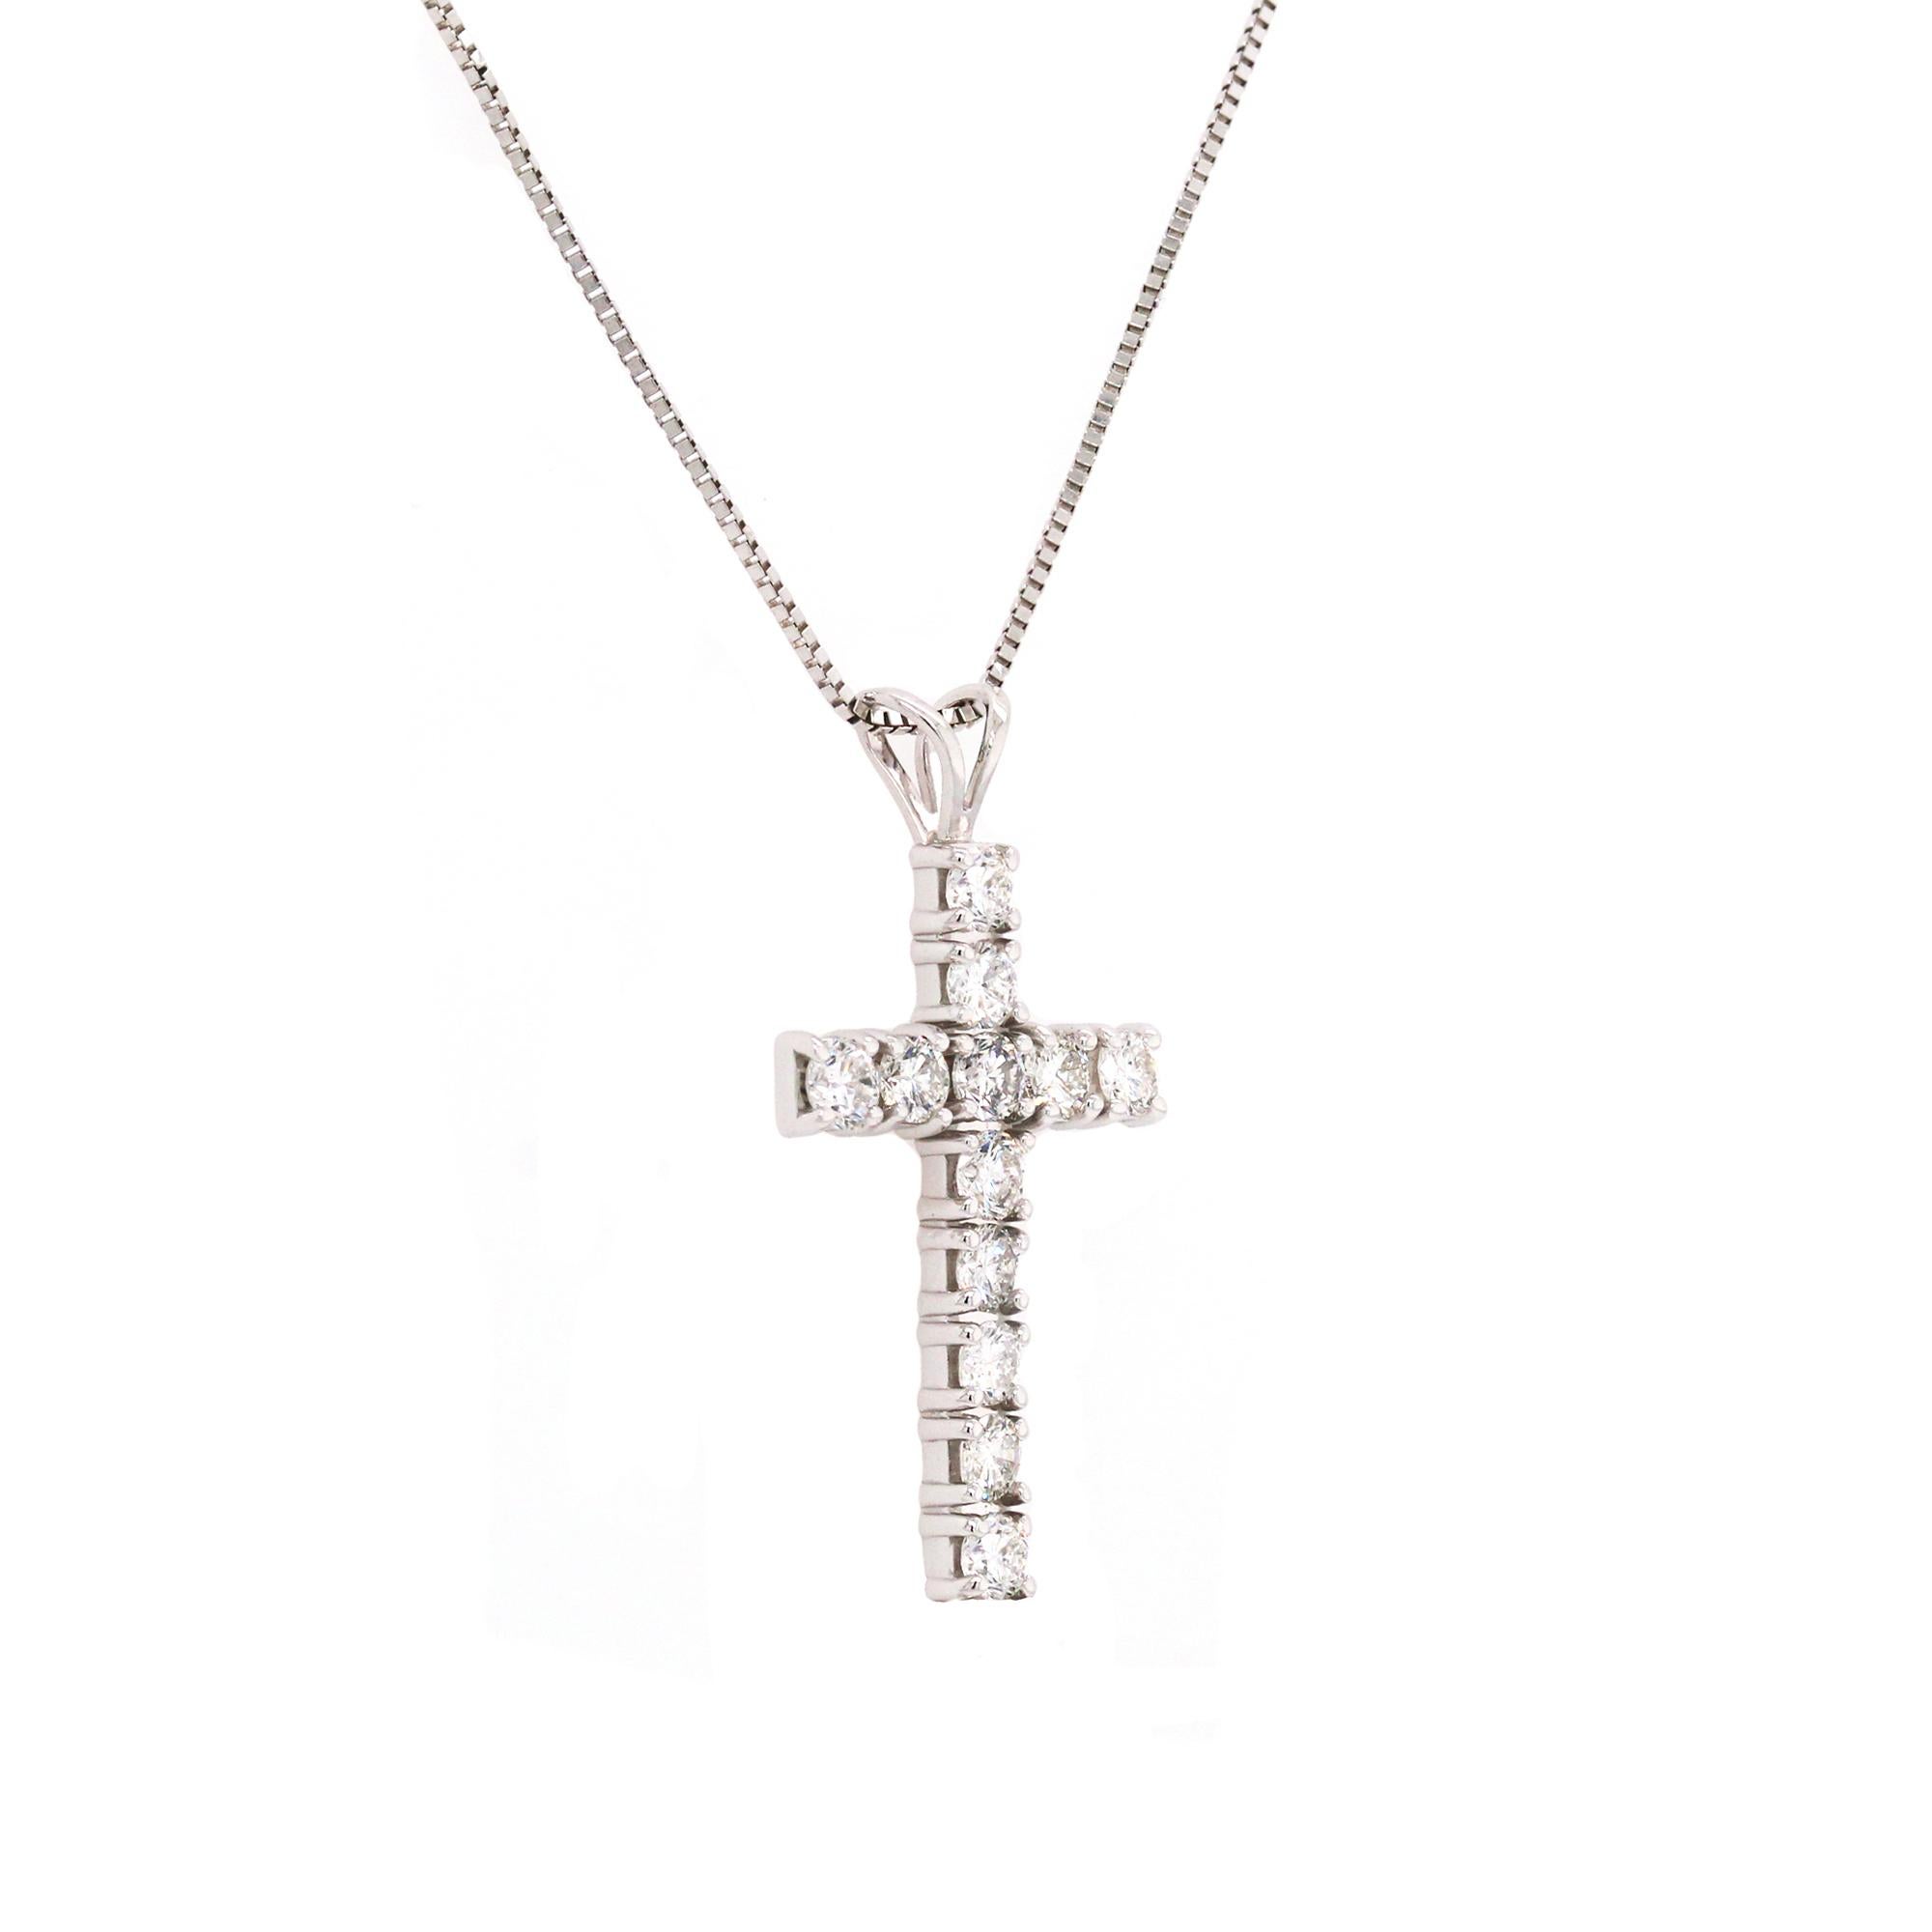 14K White Gold and Diamond Cross Pendant Necklace with Chain

Cross has 1 carat in diamonds total weight. G color, VS clarity diamonds. 12 diamonds total

Cross is 1 inch by 0.60 inch.

Chain is 16 inches in length.